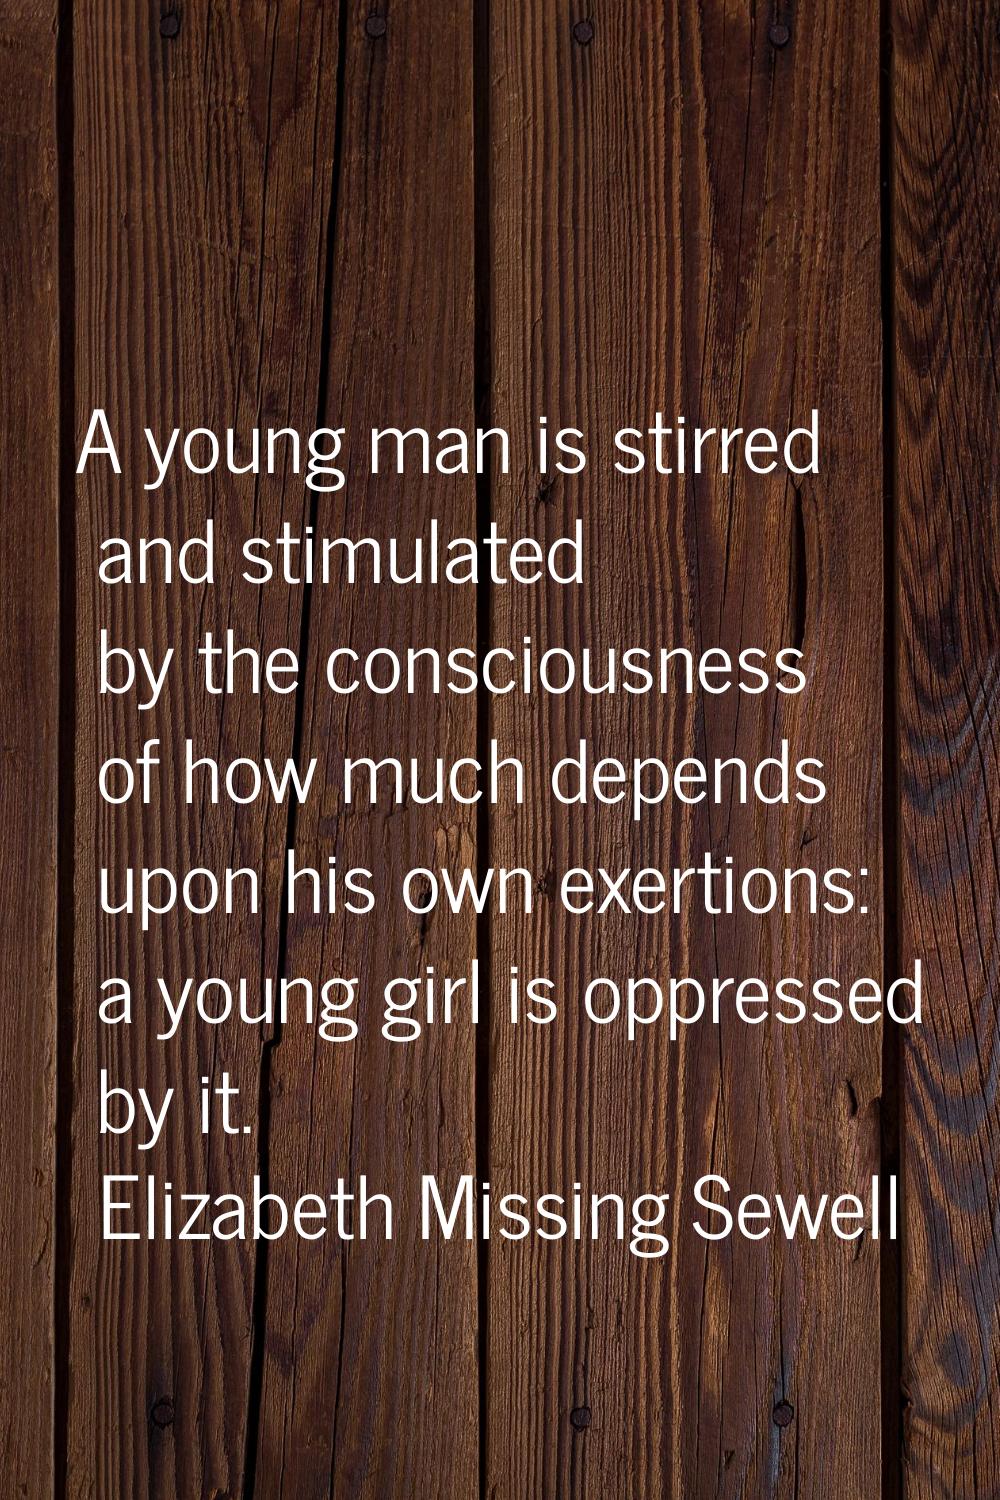 A young man is stirred and stimulated by the consciousness of how much depends upon his own exertio